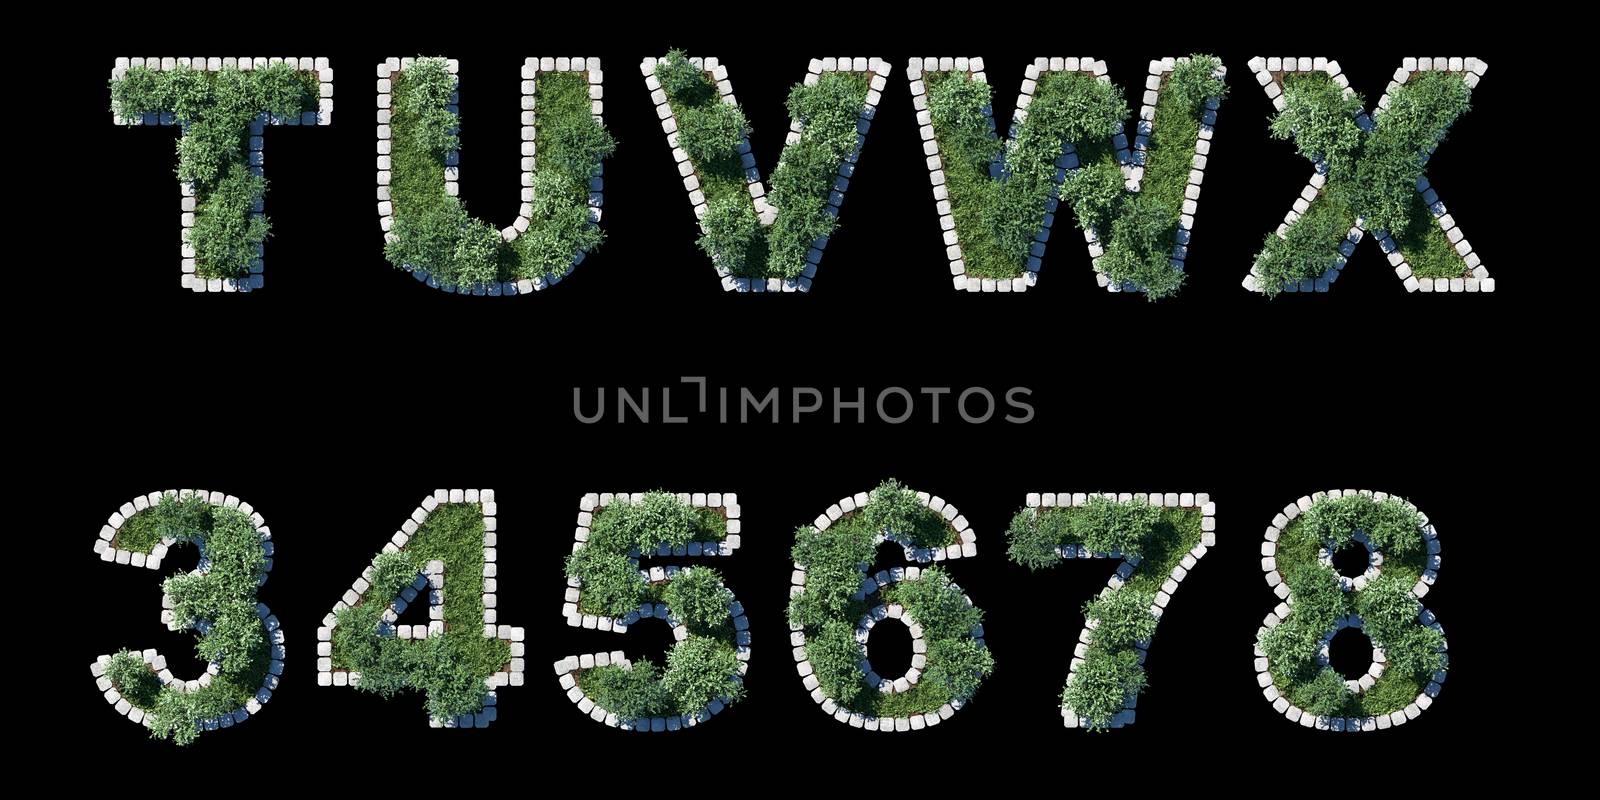 green garden set with grey cubing border on black. letters and numerals